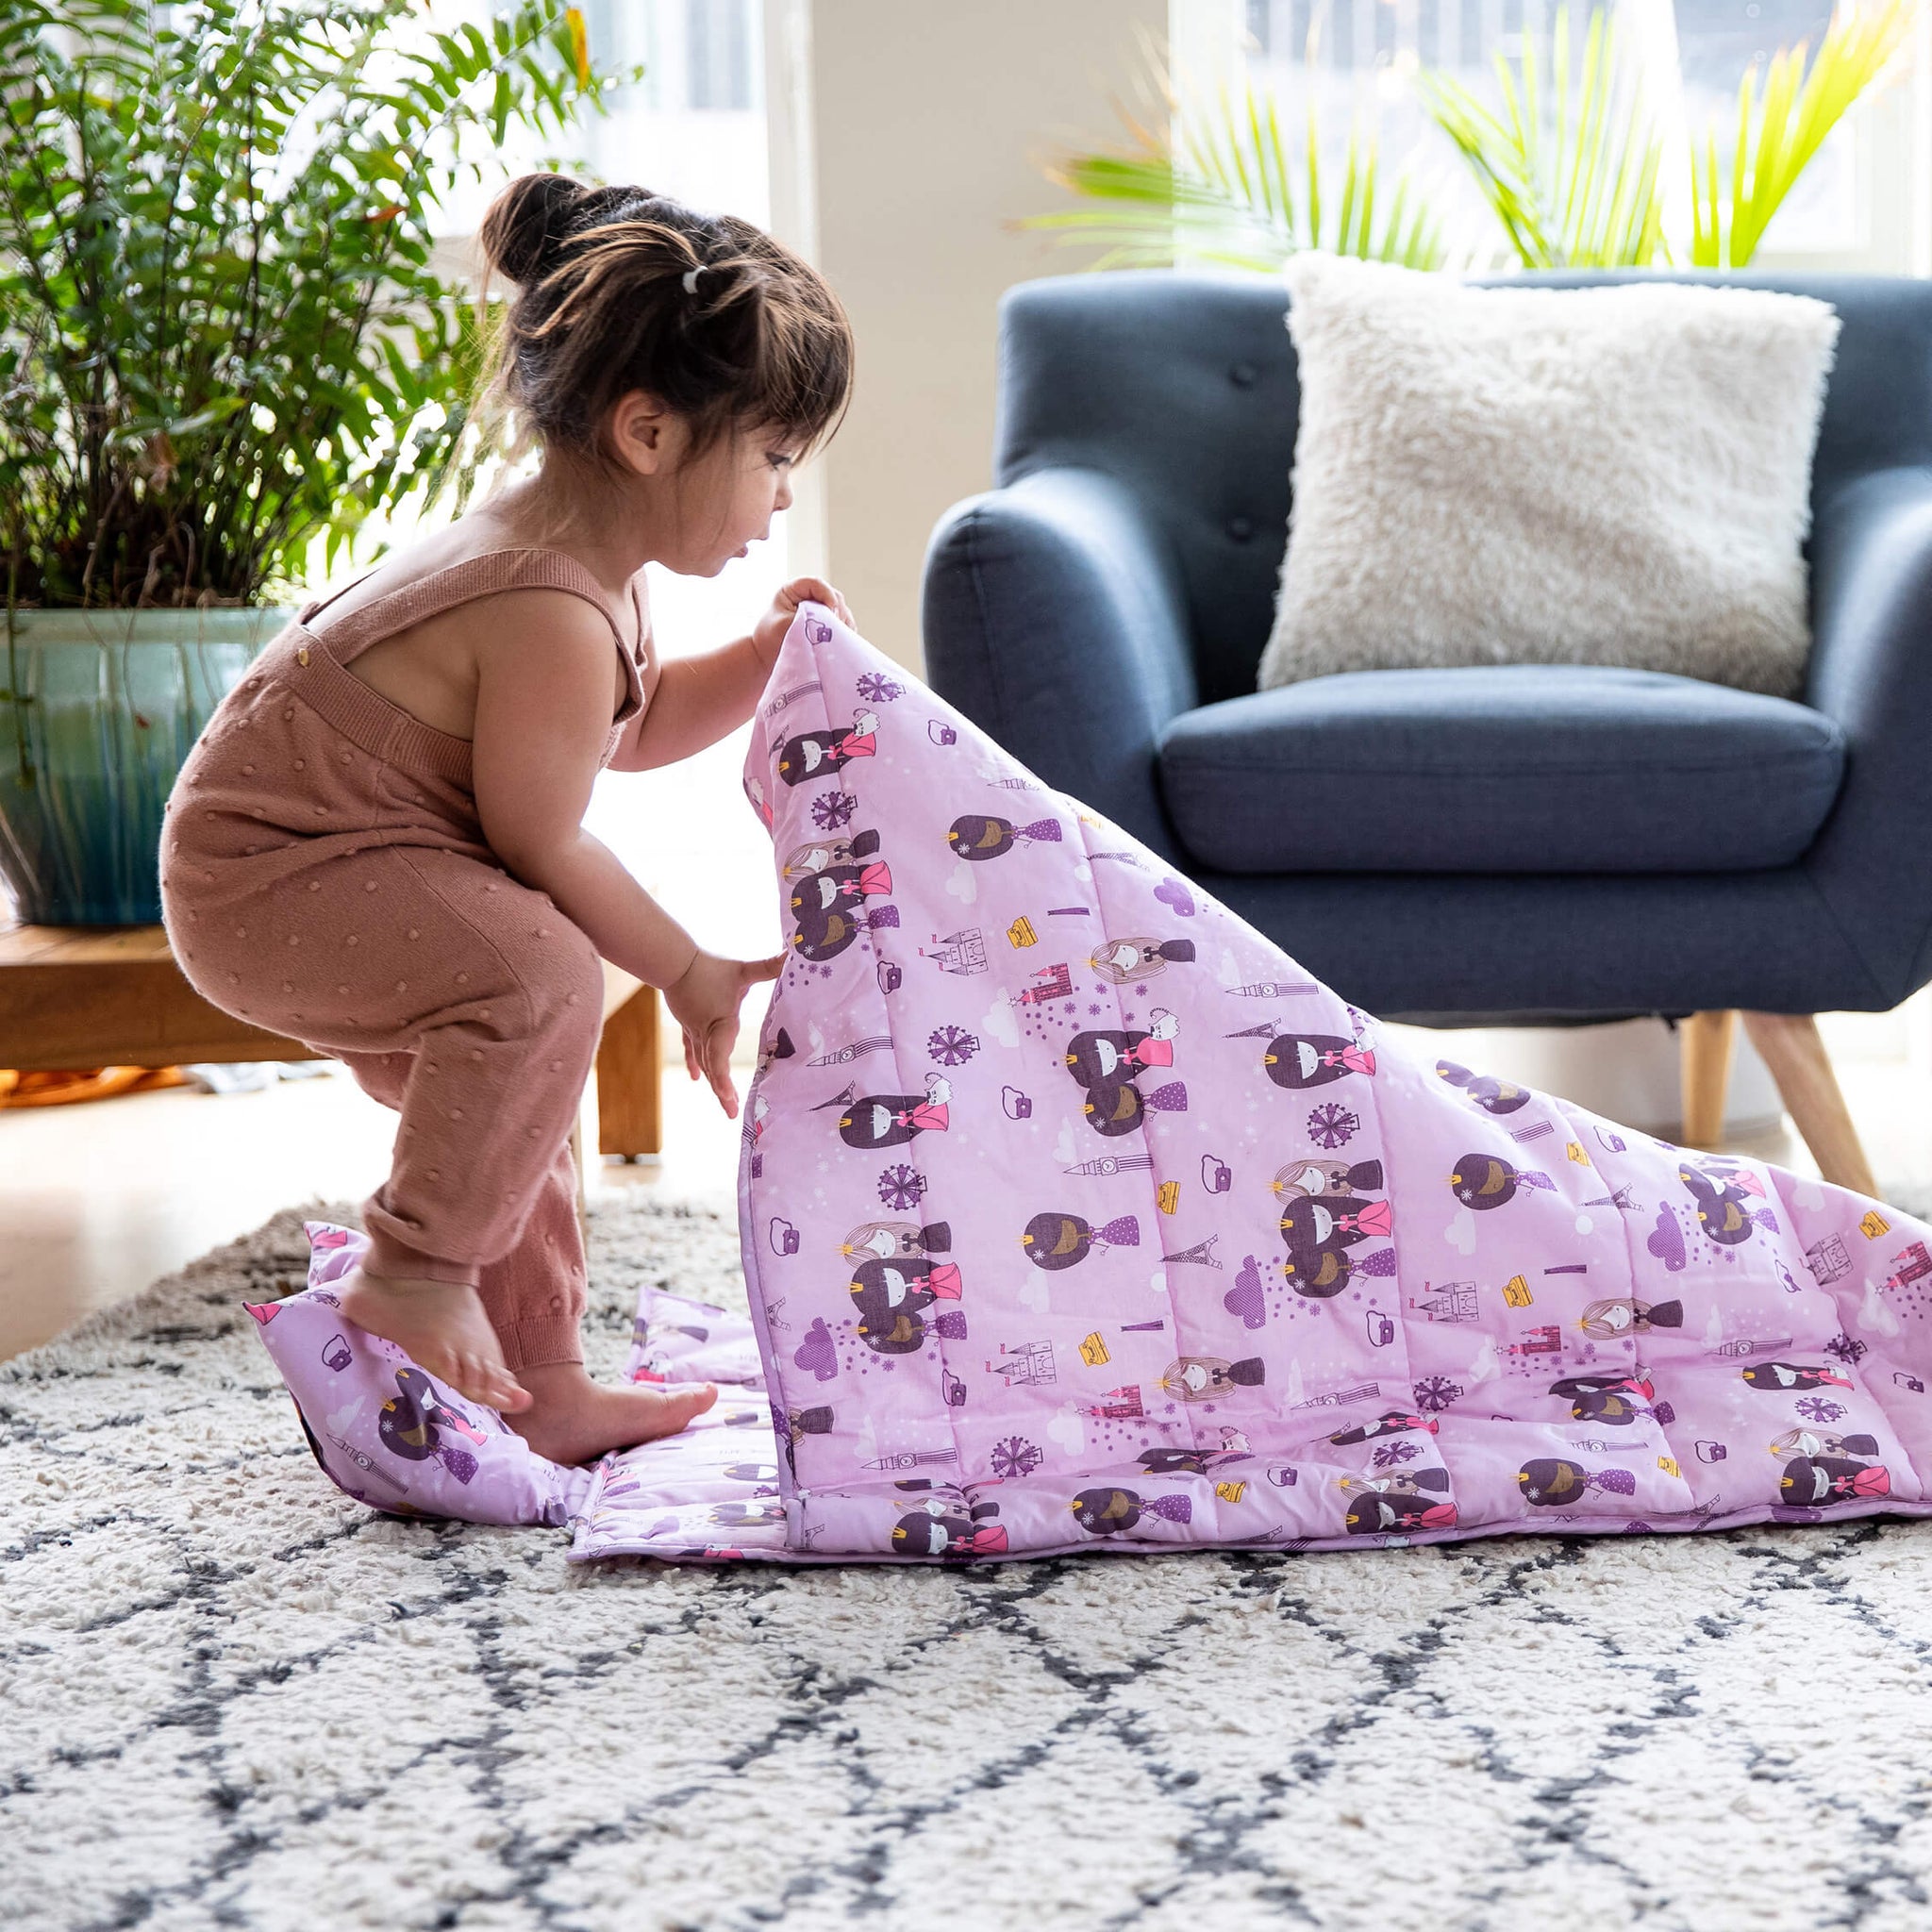 Urban Infant Bulkie Kids Super Sleepover Nap Mat - Home Hangout - Toddler Preschool and Daycare - Washable Blanket and Pillow - Converts to Backpack